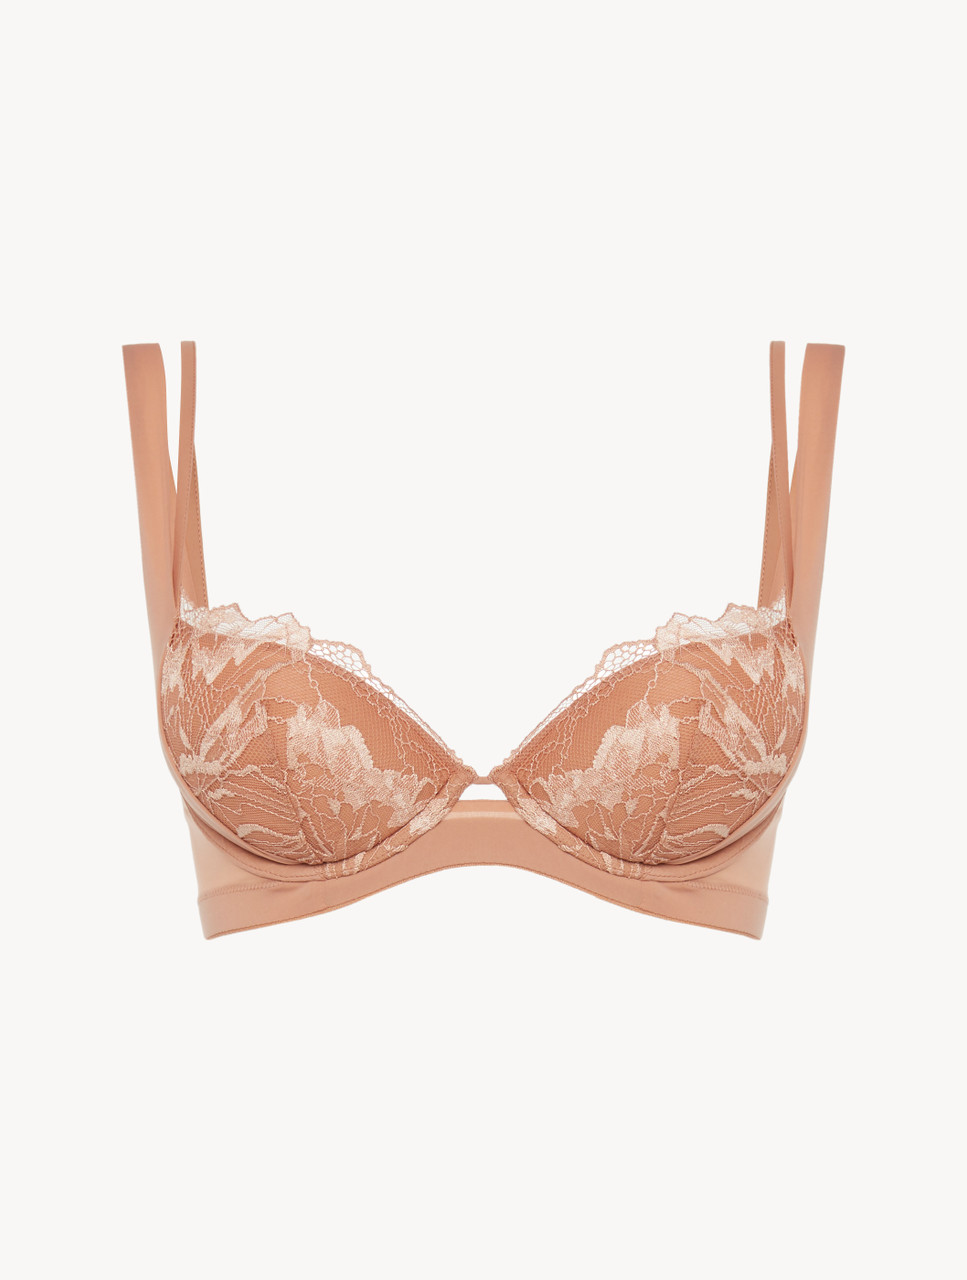 Push-up bra in pink with French Leavers lace